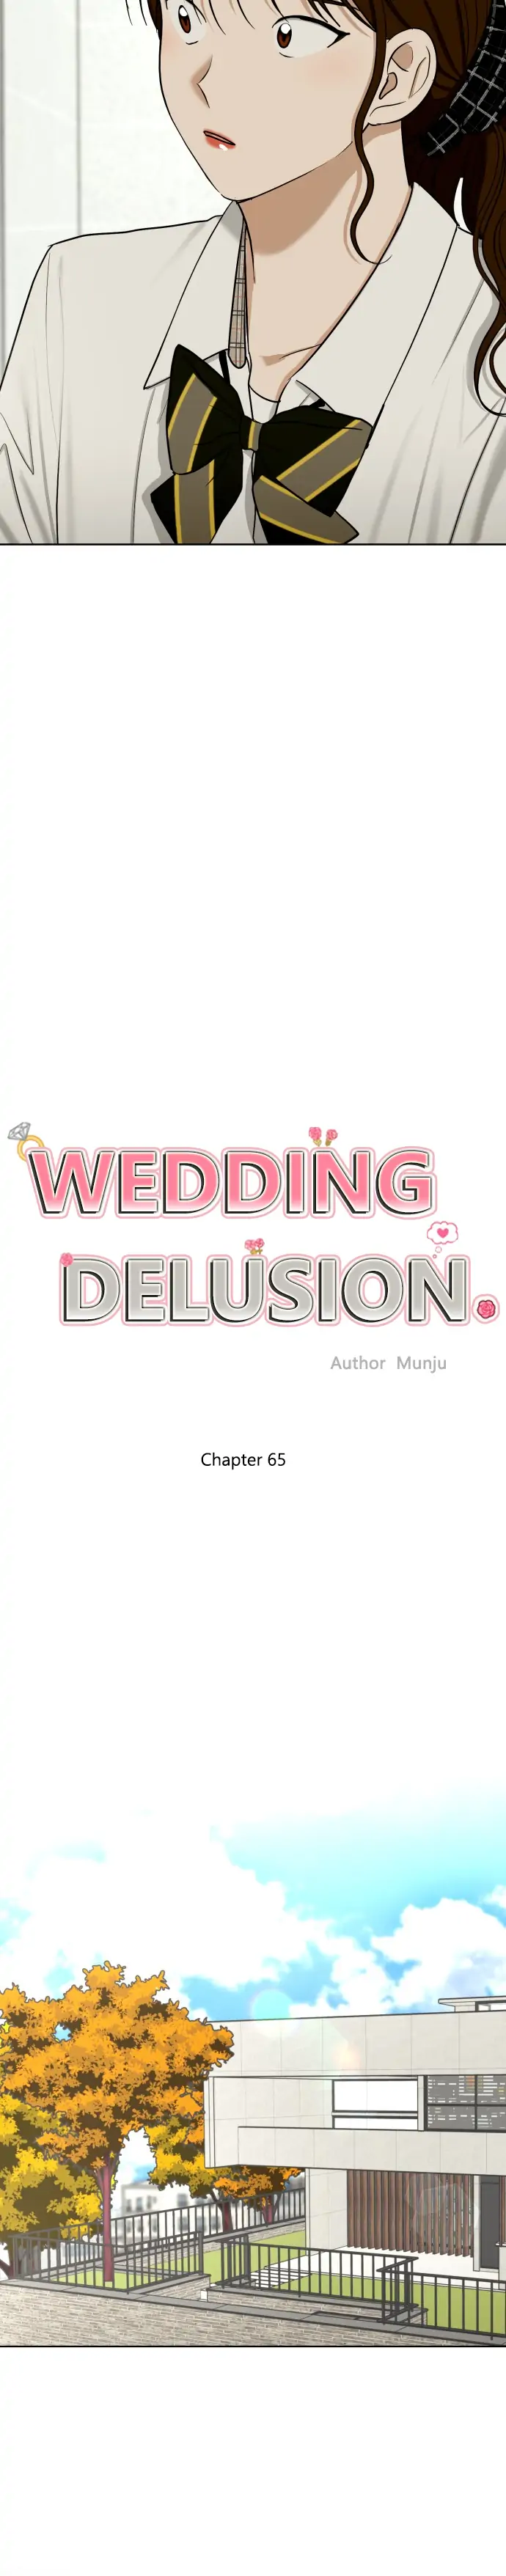 Wedding Delusion chapter 65